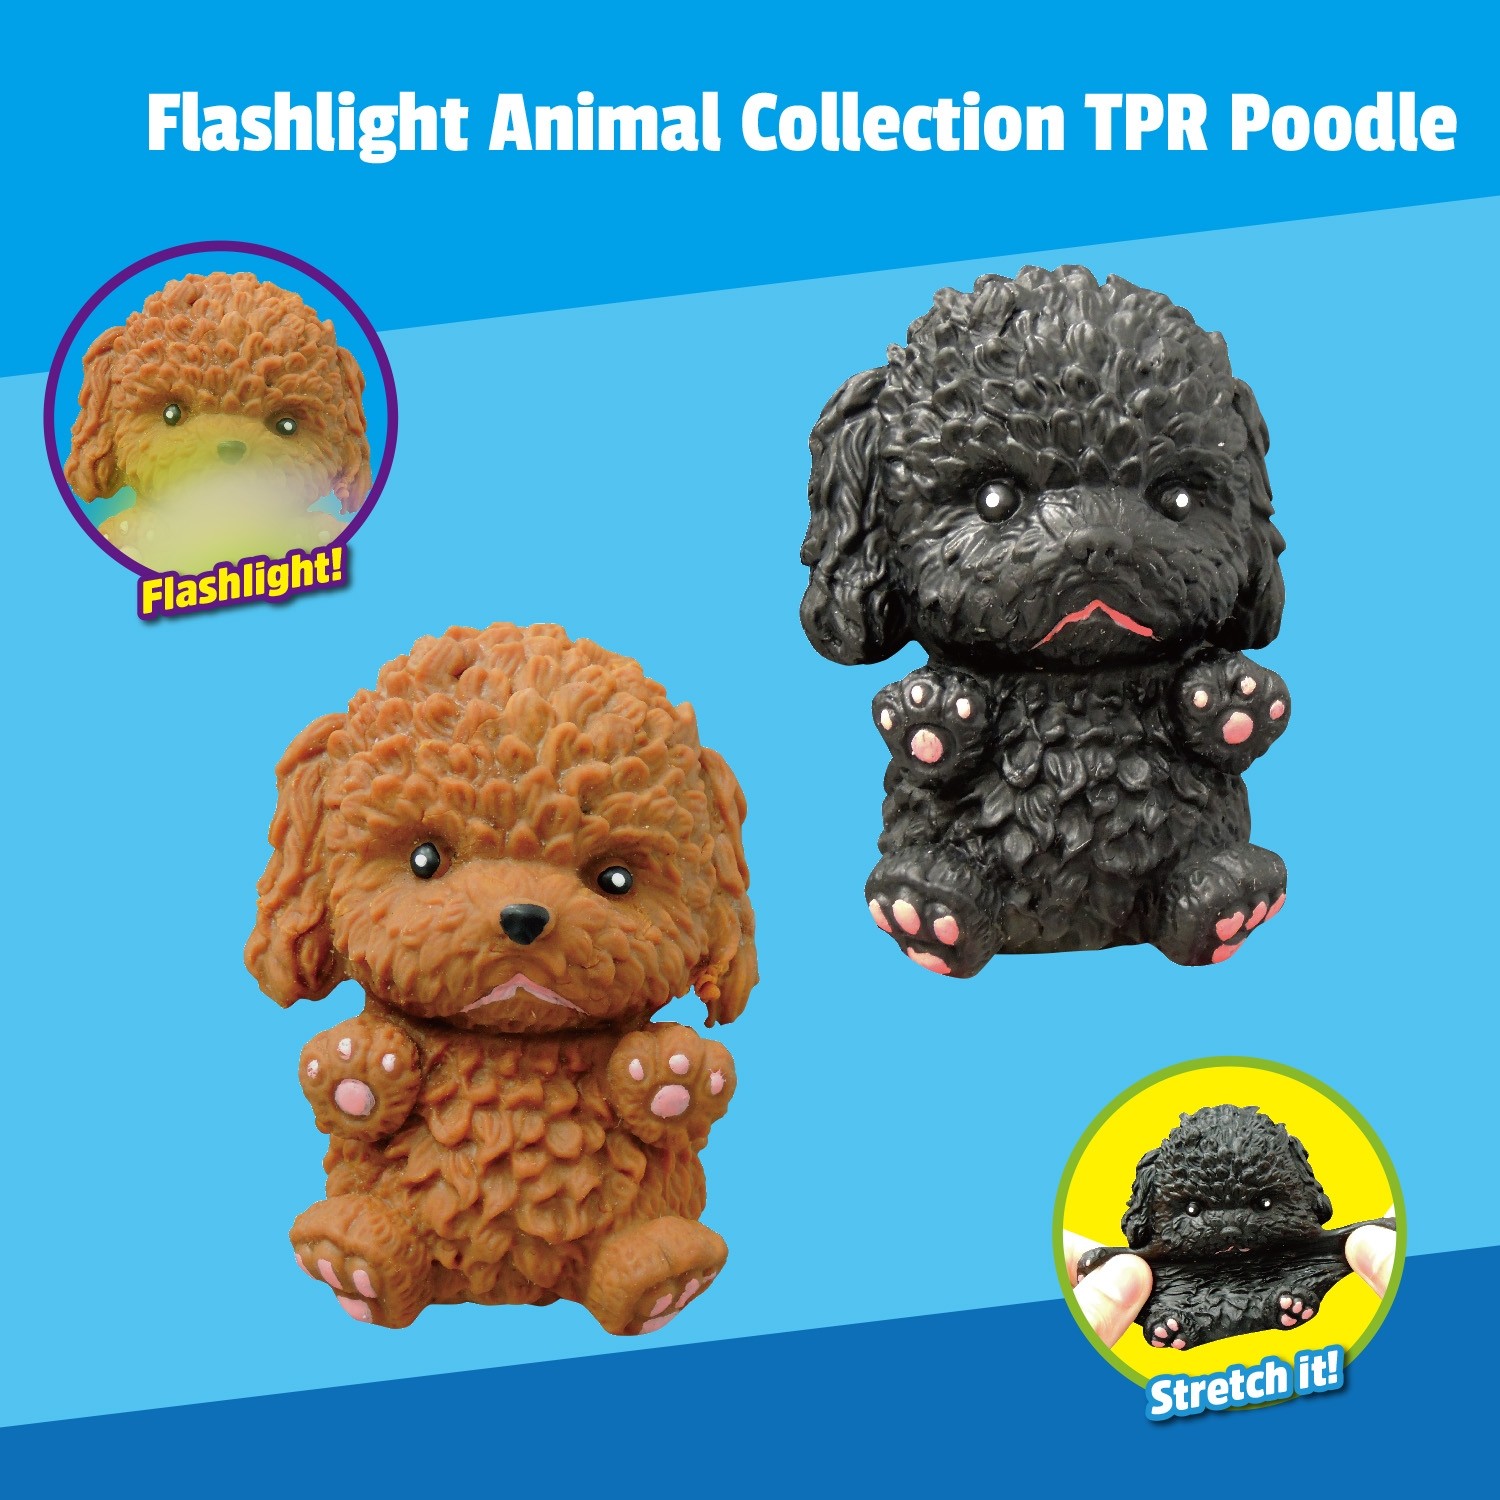 "Flashlight Animal Collection" TPR Poodle